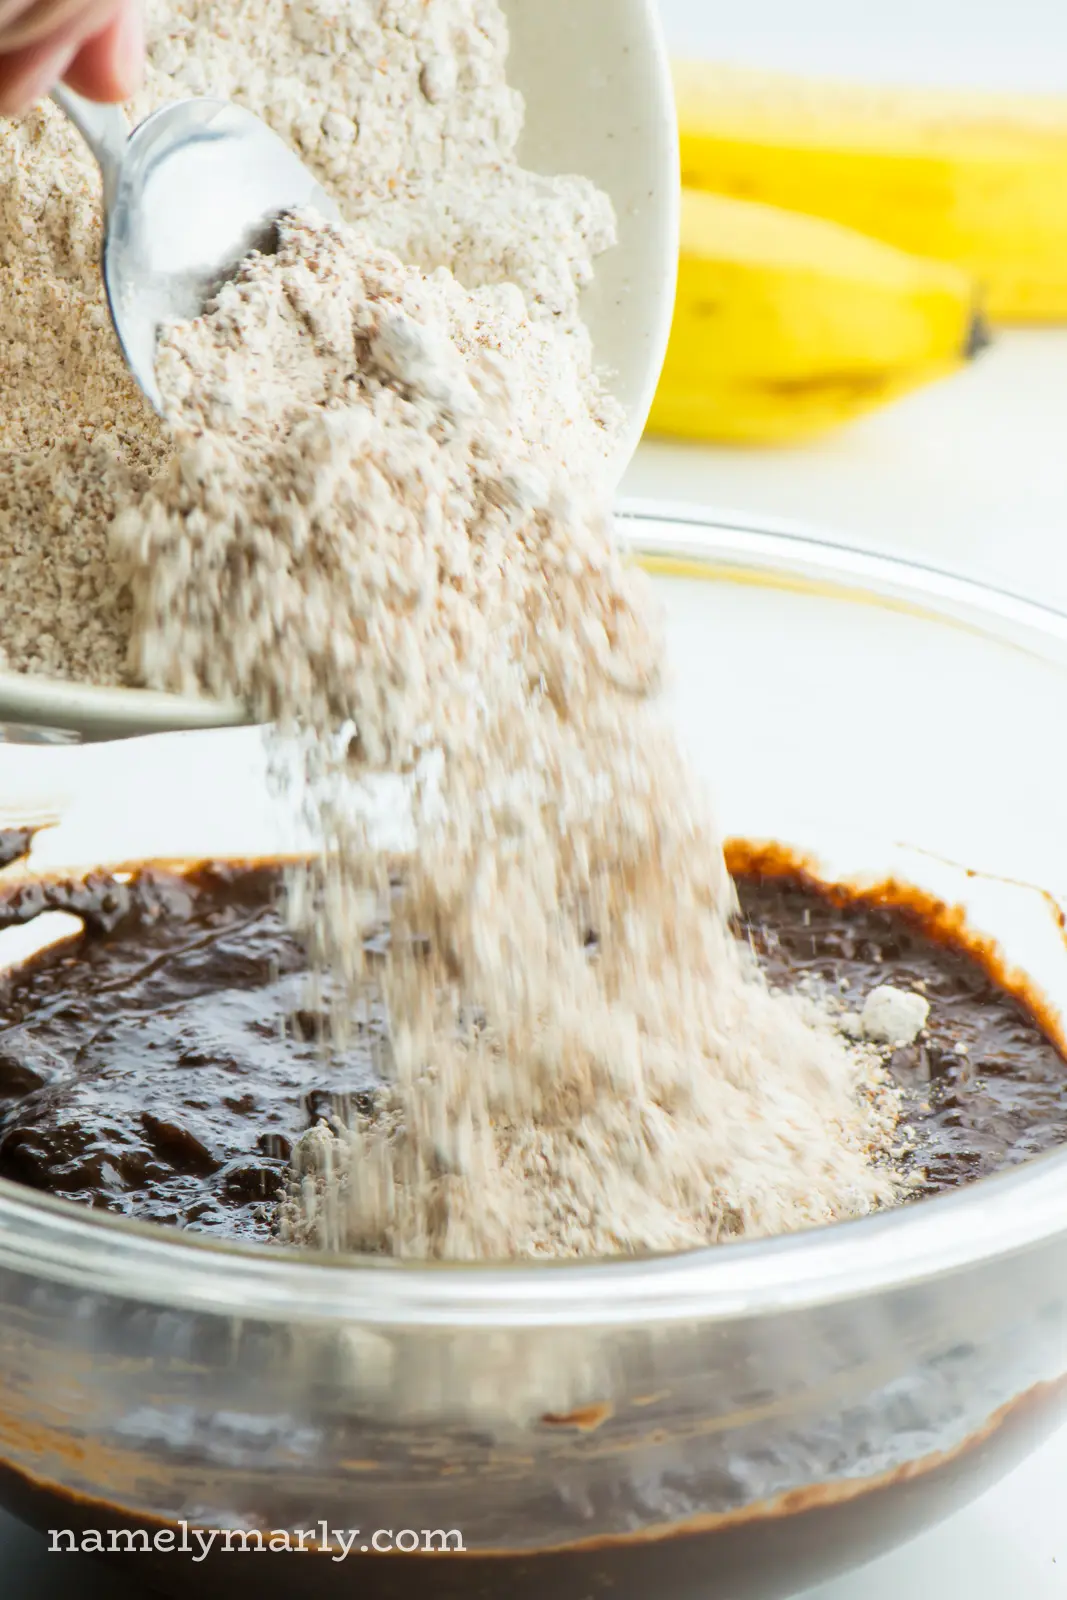 Whole wheat pastry flour is being poured into a a bowl of chocolate batter. Bananas are in the background.